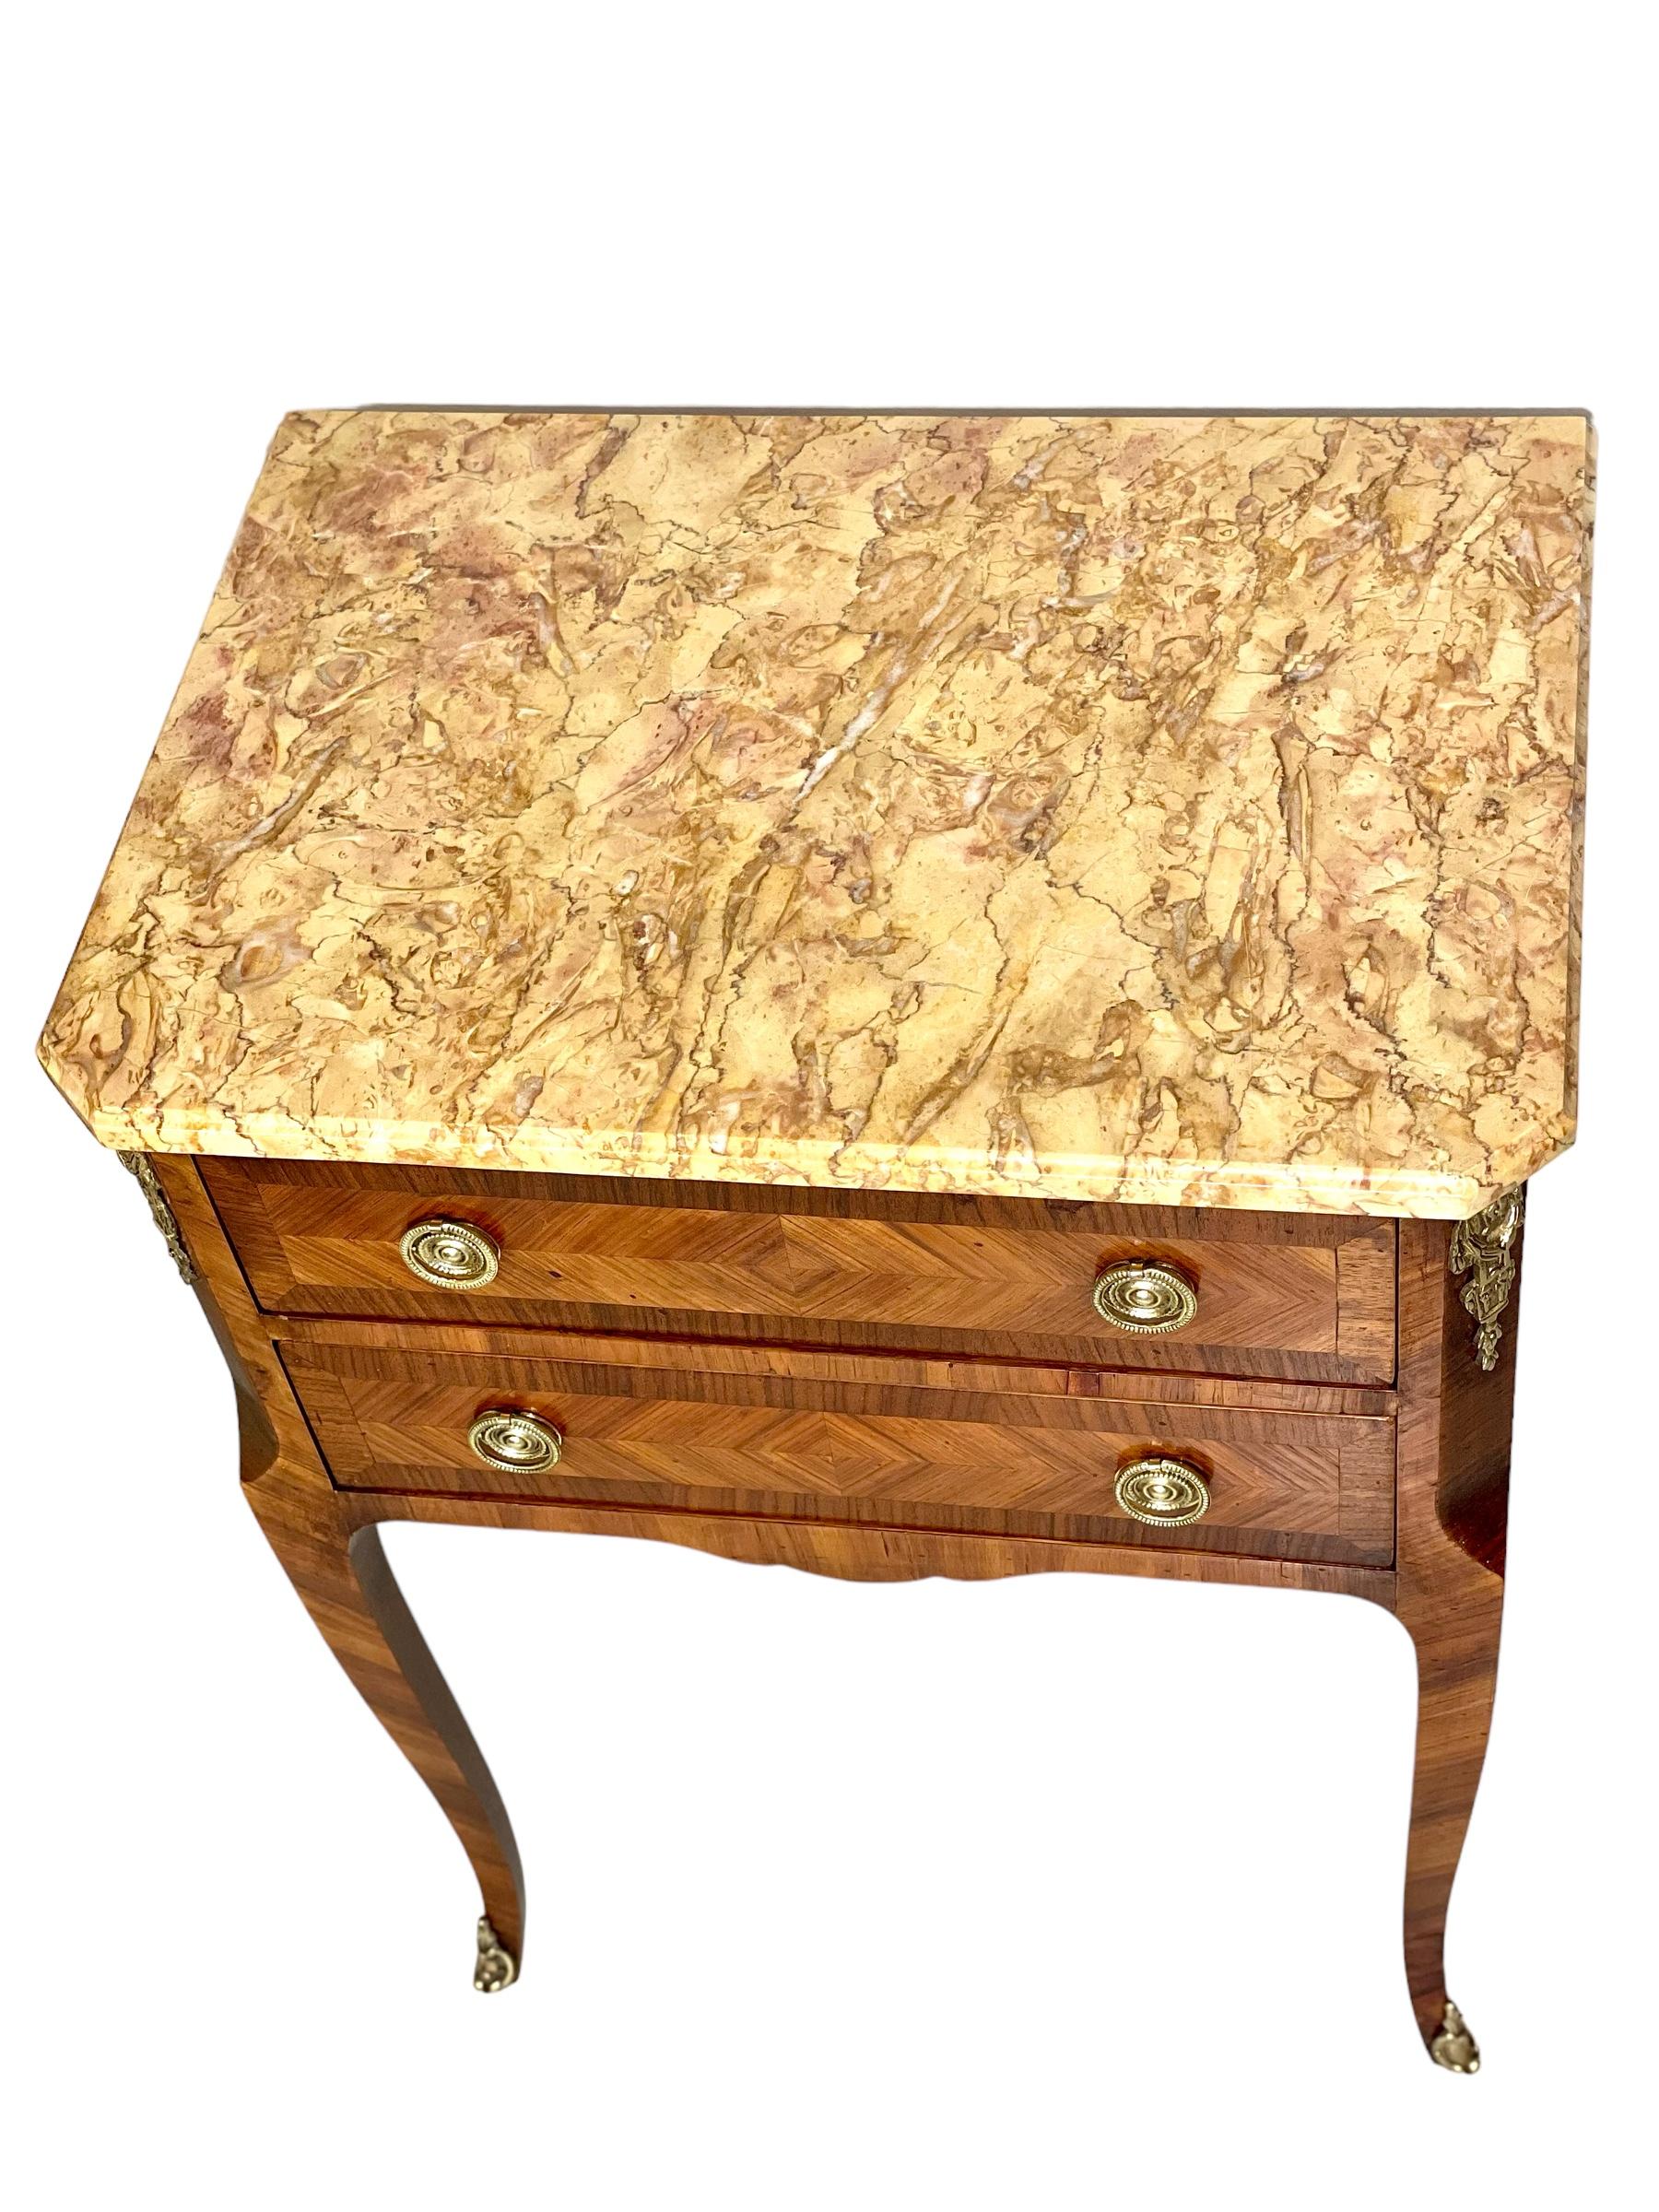 Louis XVI 19th Century French Transition Style Petite Commode with Marble Top For Sale